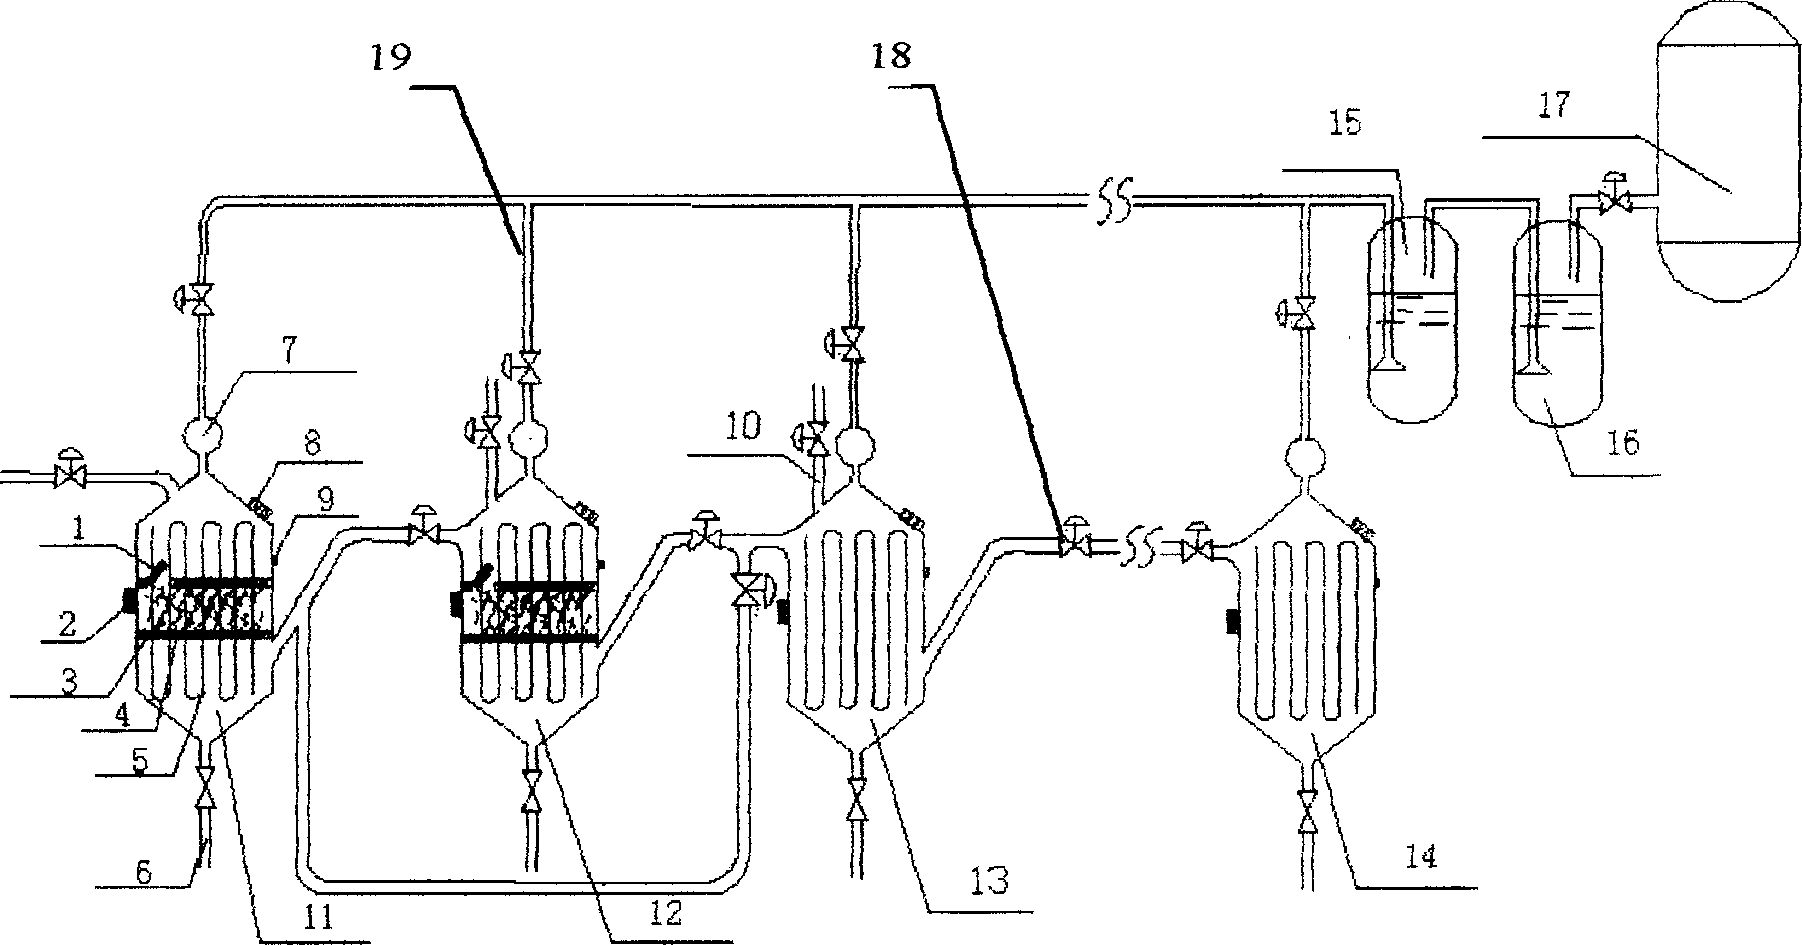 Series-parallel multi-stage compounding apparatus and method for producing hydrogen by biomass continceous fermentation